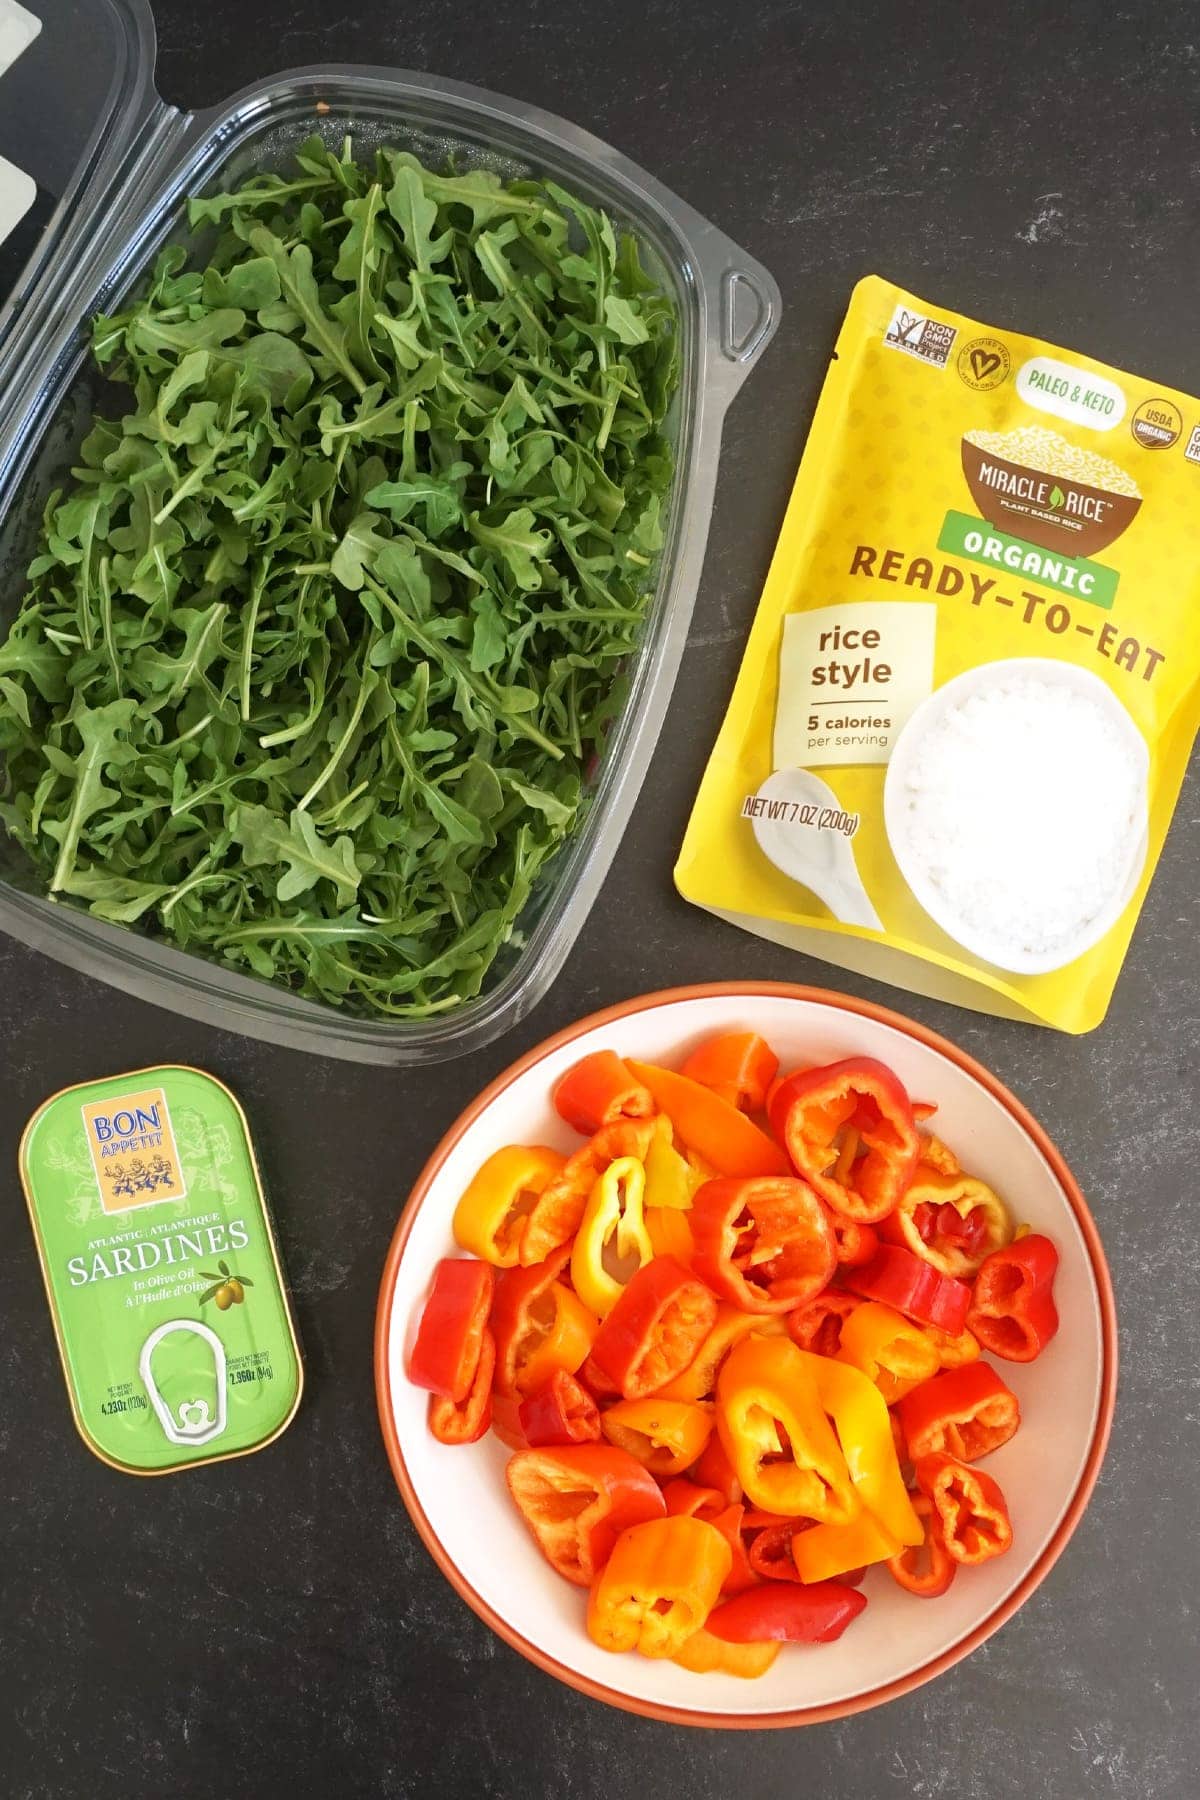 Ingredients: Arugula, Miracle Rice, Bell Peppers and a Can of Sardines